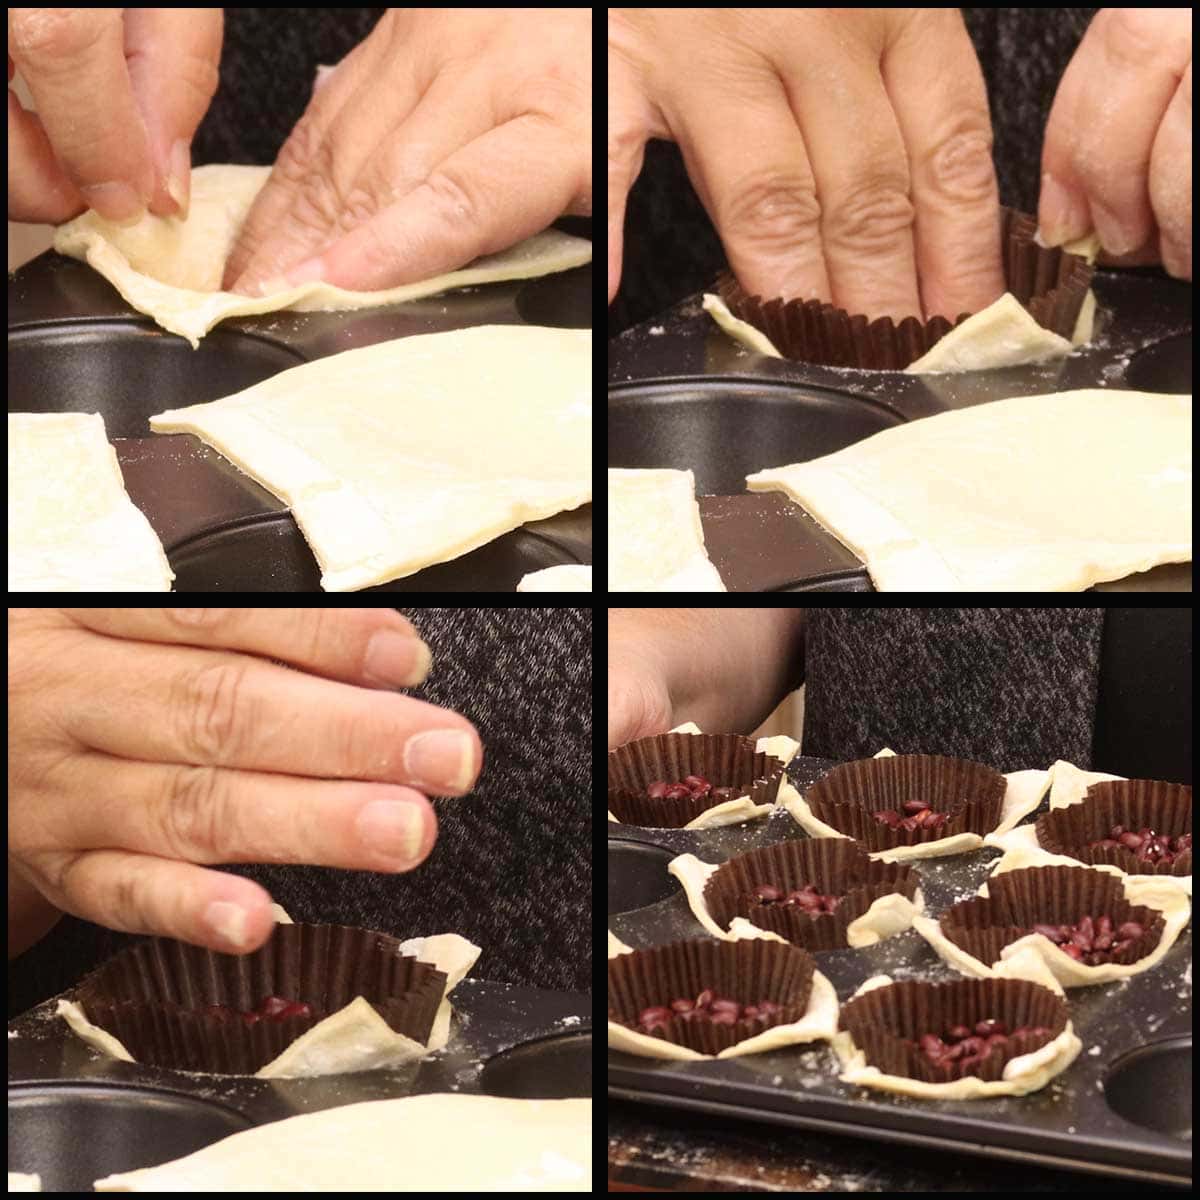 placing puff pastry into muffin tins before baking